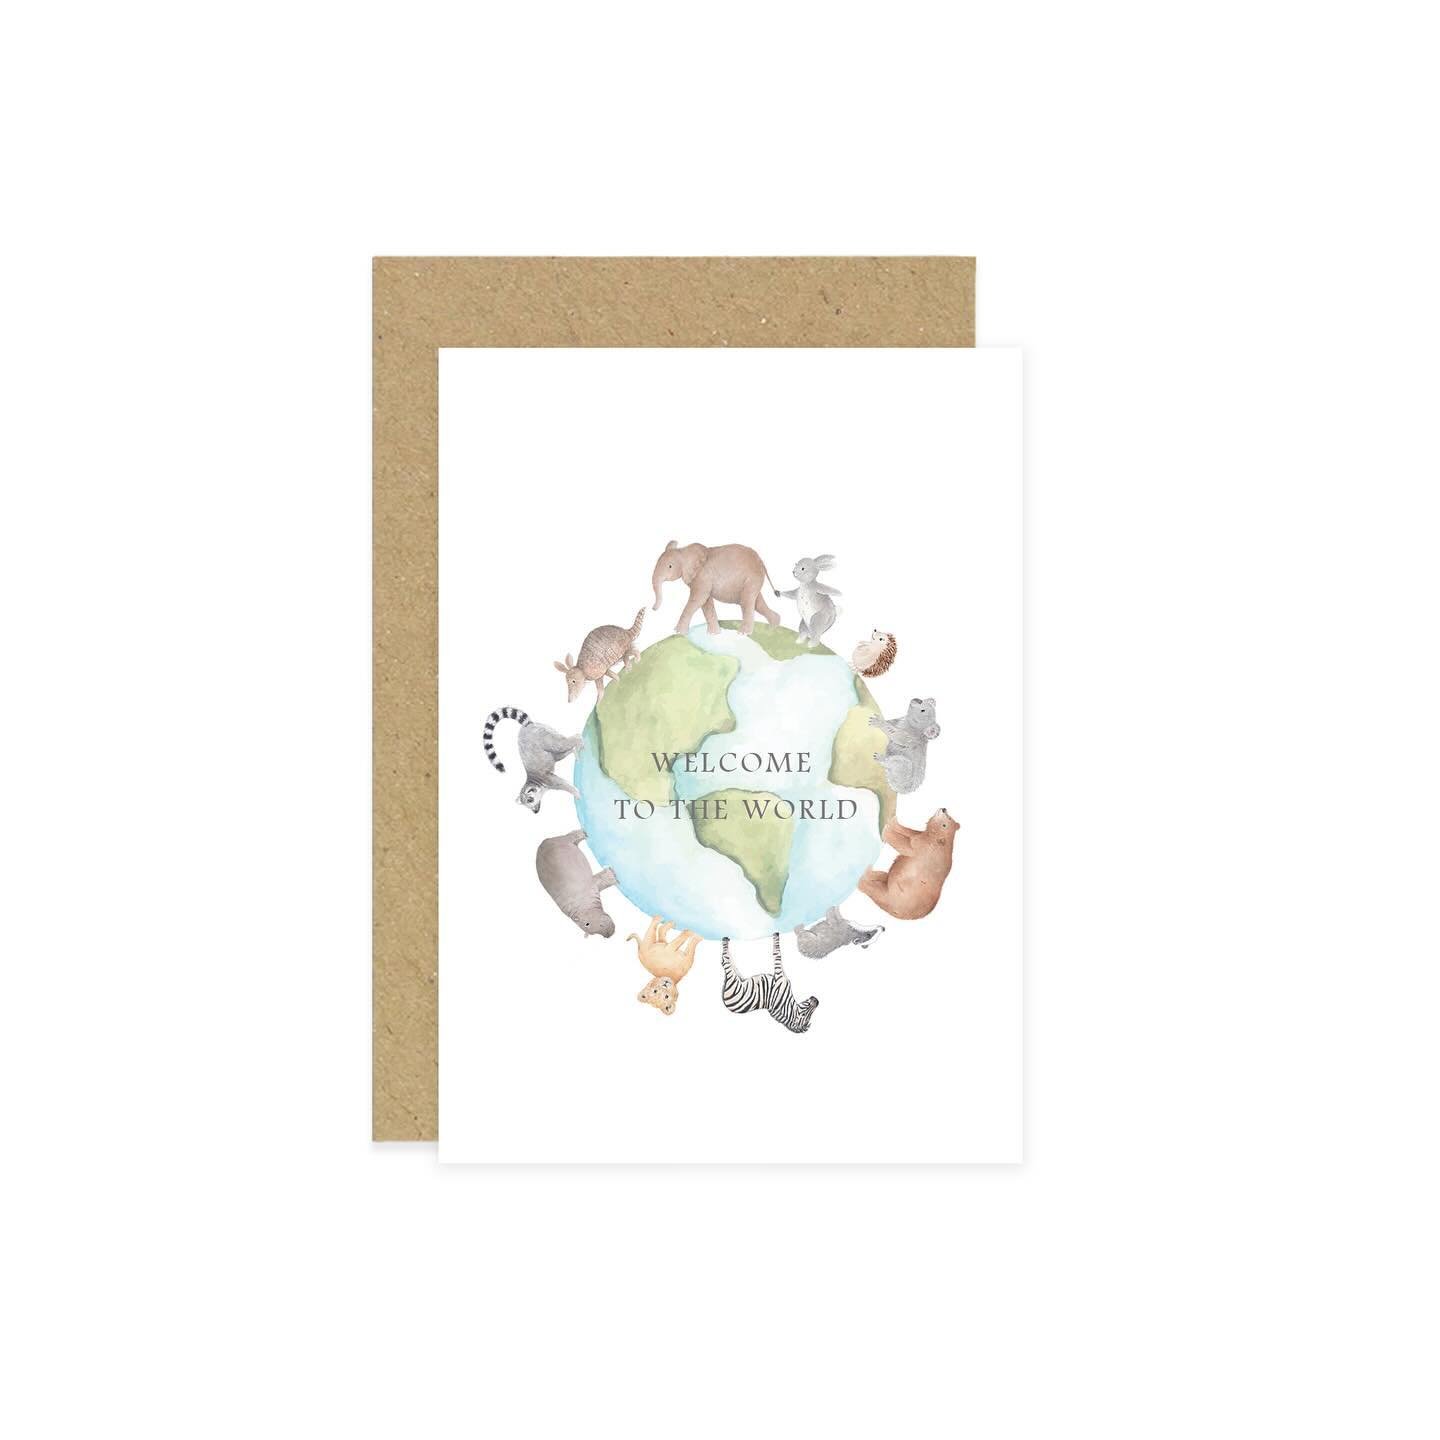 Happy earth day! 🌍

Today is an annual event dedicated to raising awareness of the importance in protecting our precious planet 🤍

So what do I do at Little Roglets to do my bit?

✨Cards are printed in small batches, and packed &lsquo;naked&rsquo;,